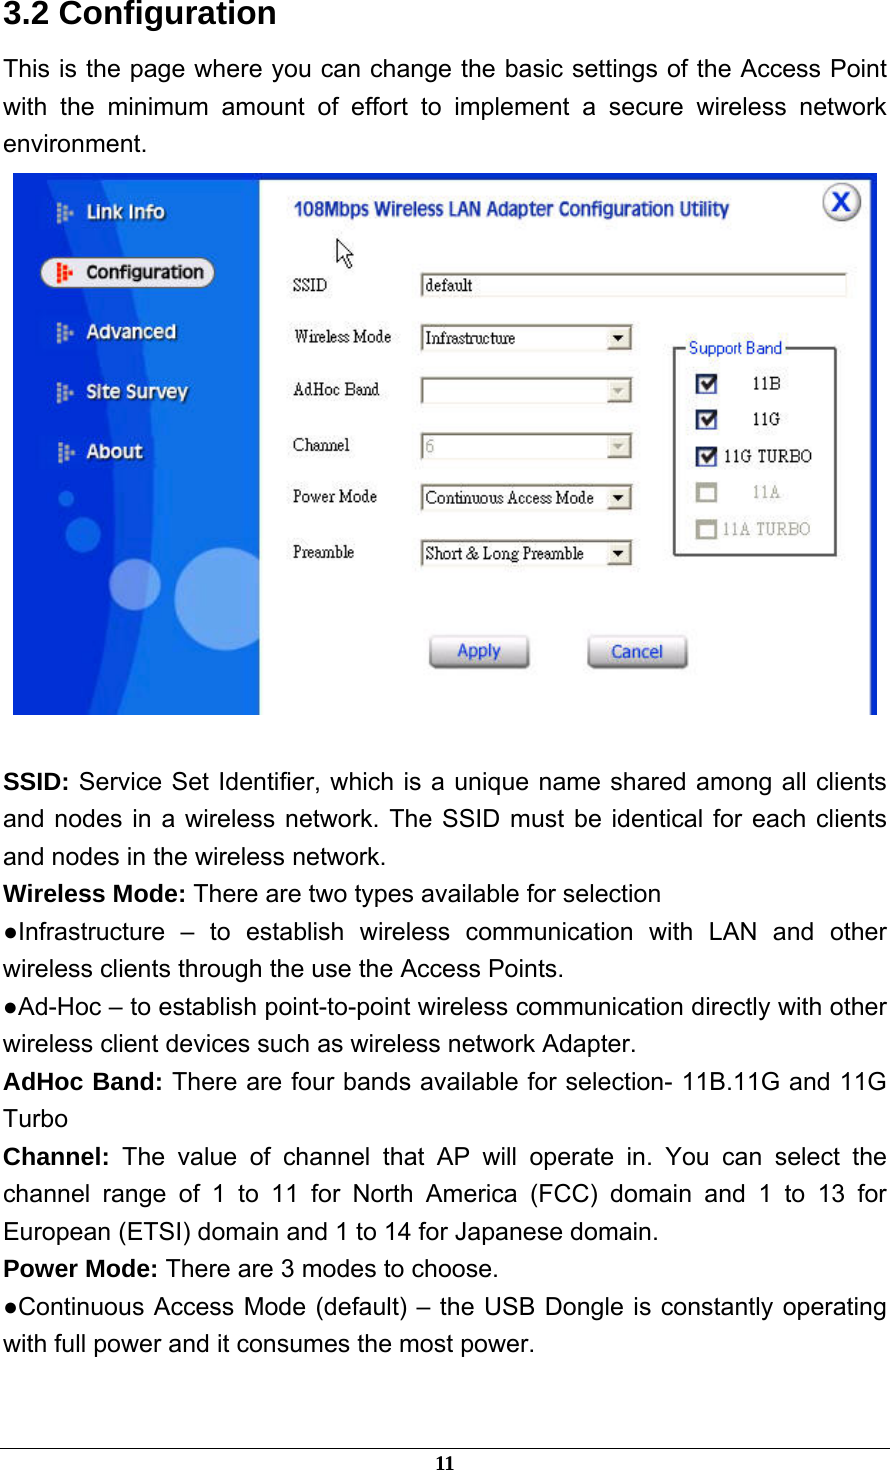  3.2 Configuration This is the page where you can change the basic settings of the Access Point with the minimum amount of effort to implement a secure wireless network environment.   SSID: Service Set Identifier, which is a unique name shared among all clients and nodes in a wireless network. The SSID must be identical for each clients and nodes in the wireless network. Wireless Mode: There are two types available for selection ●Infrastructure – to establish wireless communication with LAN and other wireless clients through the use the Access Points. ●Ad-Hoc – to establish point-to-point wireless communication directly with other wireless client devices such as wireless network Adapter. AdHoc Band: There are four bands available for selection- 11B.11G and 11G Turbo Channel:  The value of channel that AP will operate in. You can select the channel range of 1 to 11 for North America (FCC) domain and 1 to 13 for European (ETSI) domain and 1 to 14 for Japanese domain. Power Mode: There are 3 modes to choose. ●Continuous Access Mode (default) – the USB Dongle is constantly operating with full power and it consumes the most power.  11 